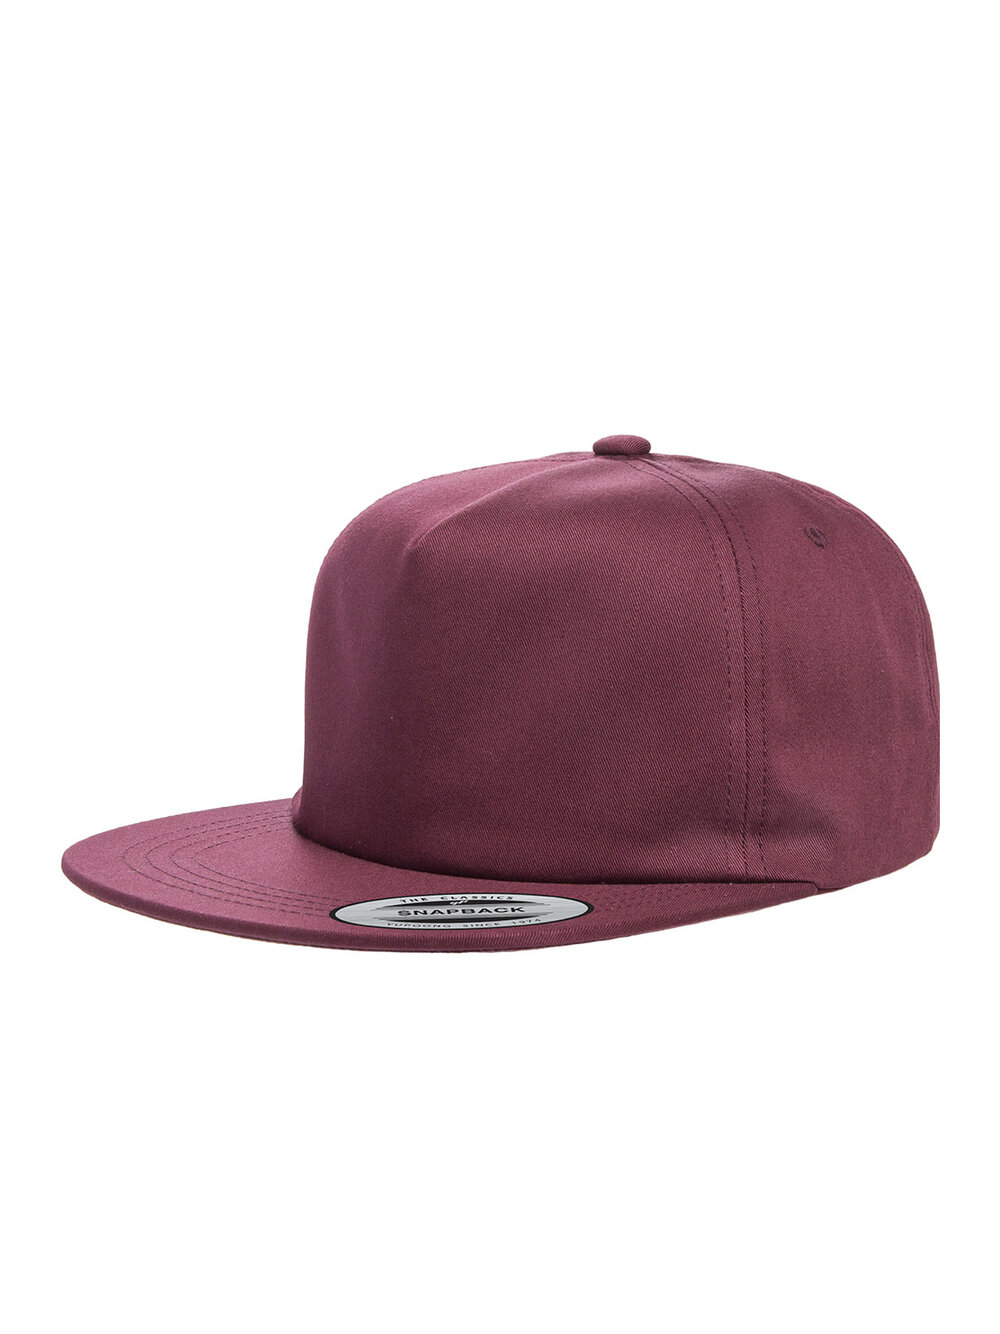 Like Snapback Yupoong — Unstructured Cap Adult Whoa Design 5-Panel